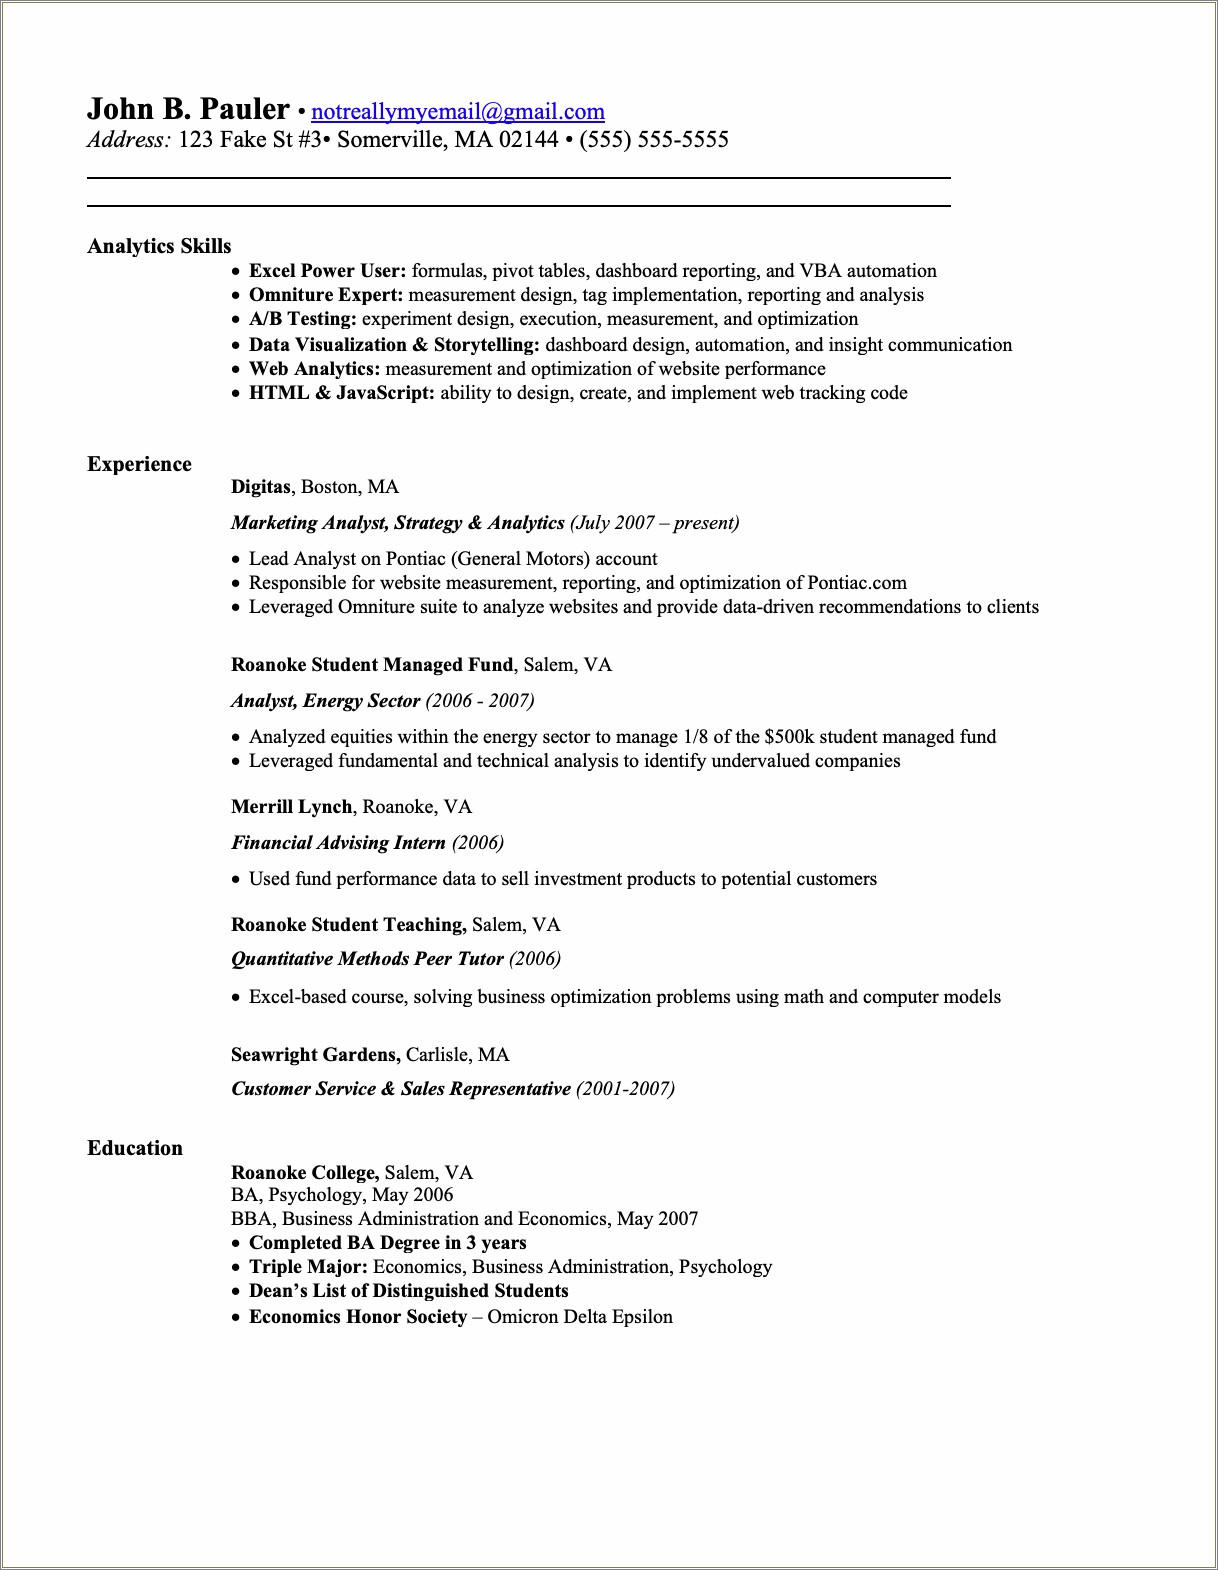 Business Analyst Credit Card Experience Resume